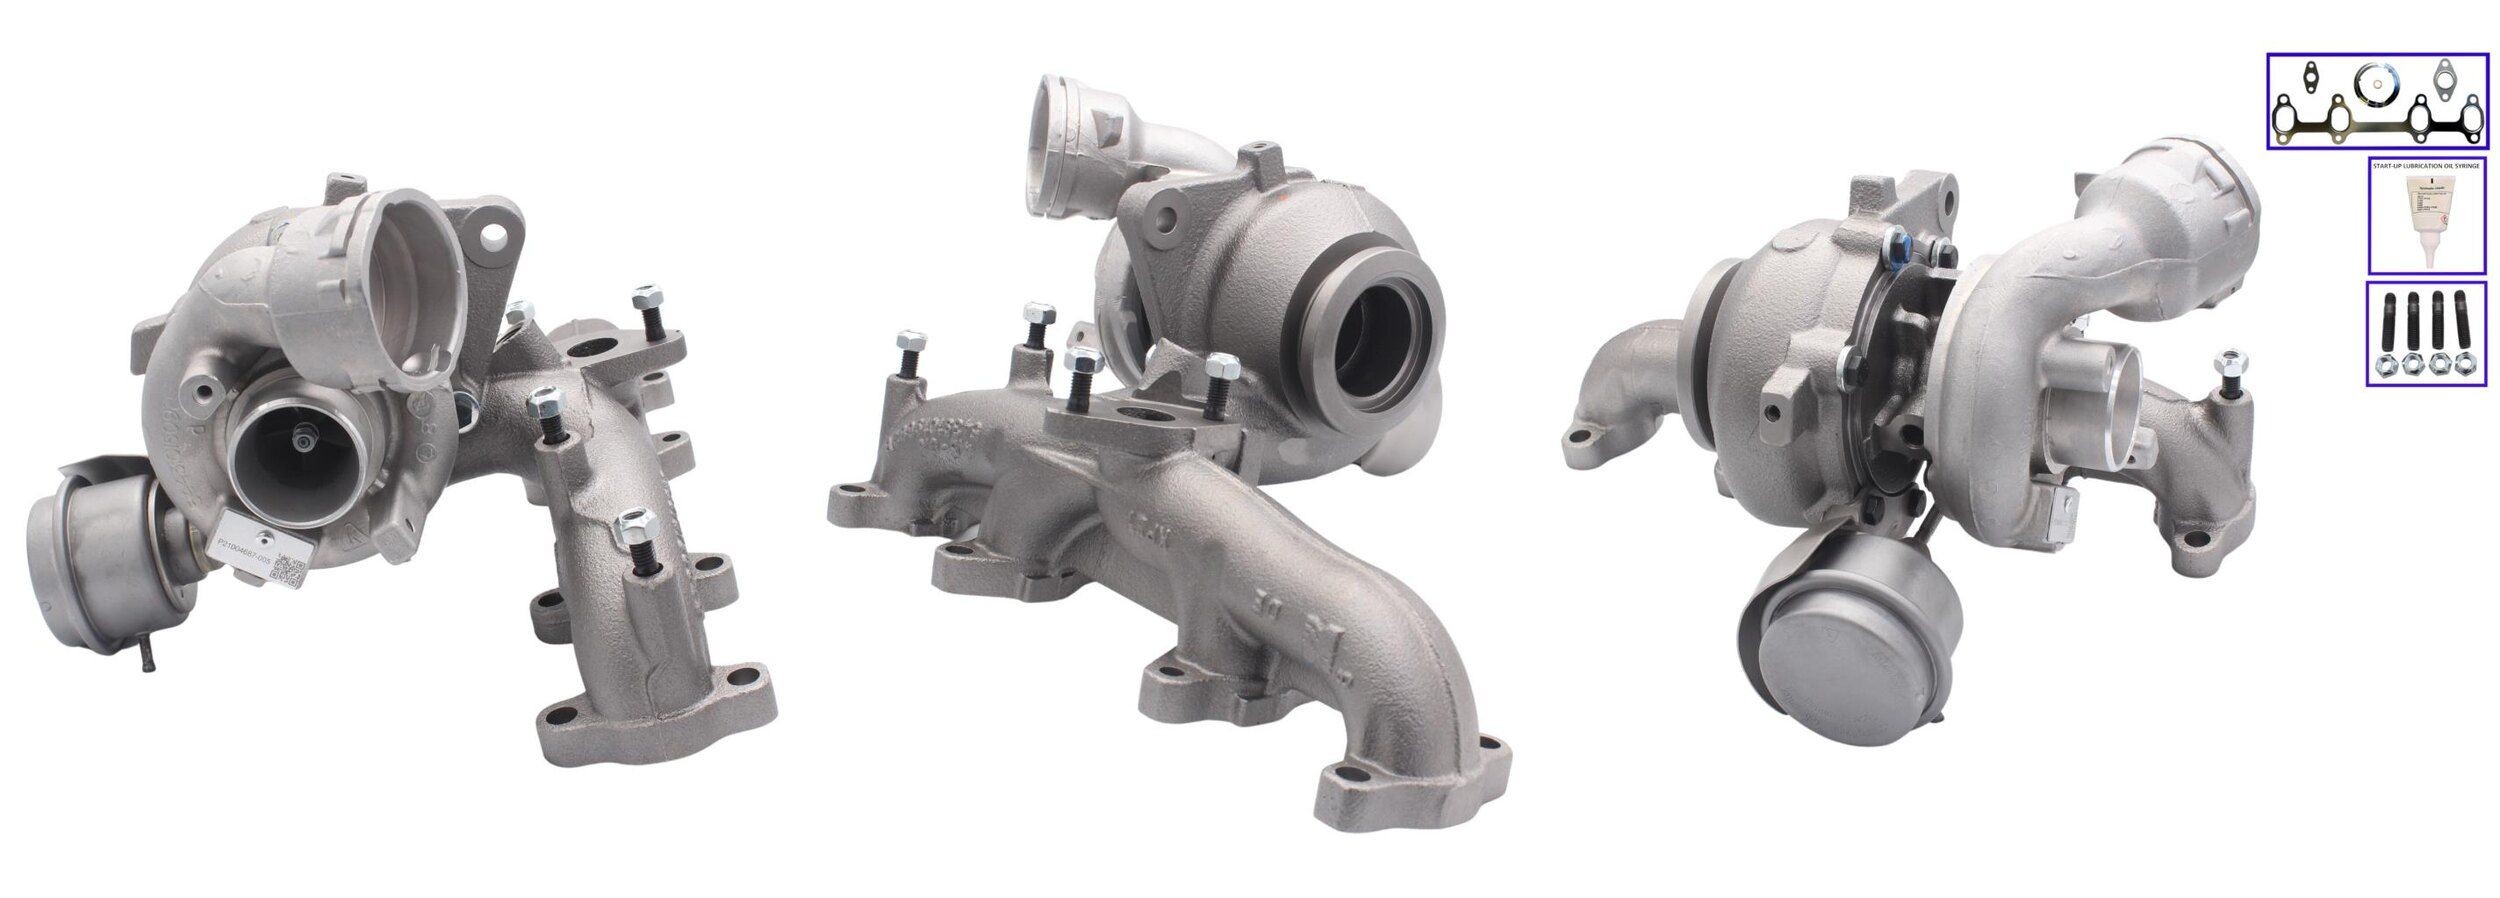 Turbocharger ELSTOCK Exhaust Turbocharger, Pneumatically controlled actuator, with gaskets/seals - 91-1485